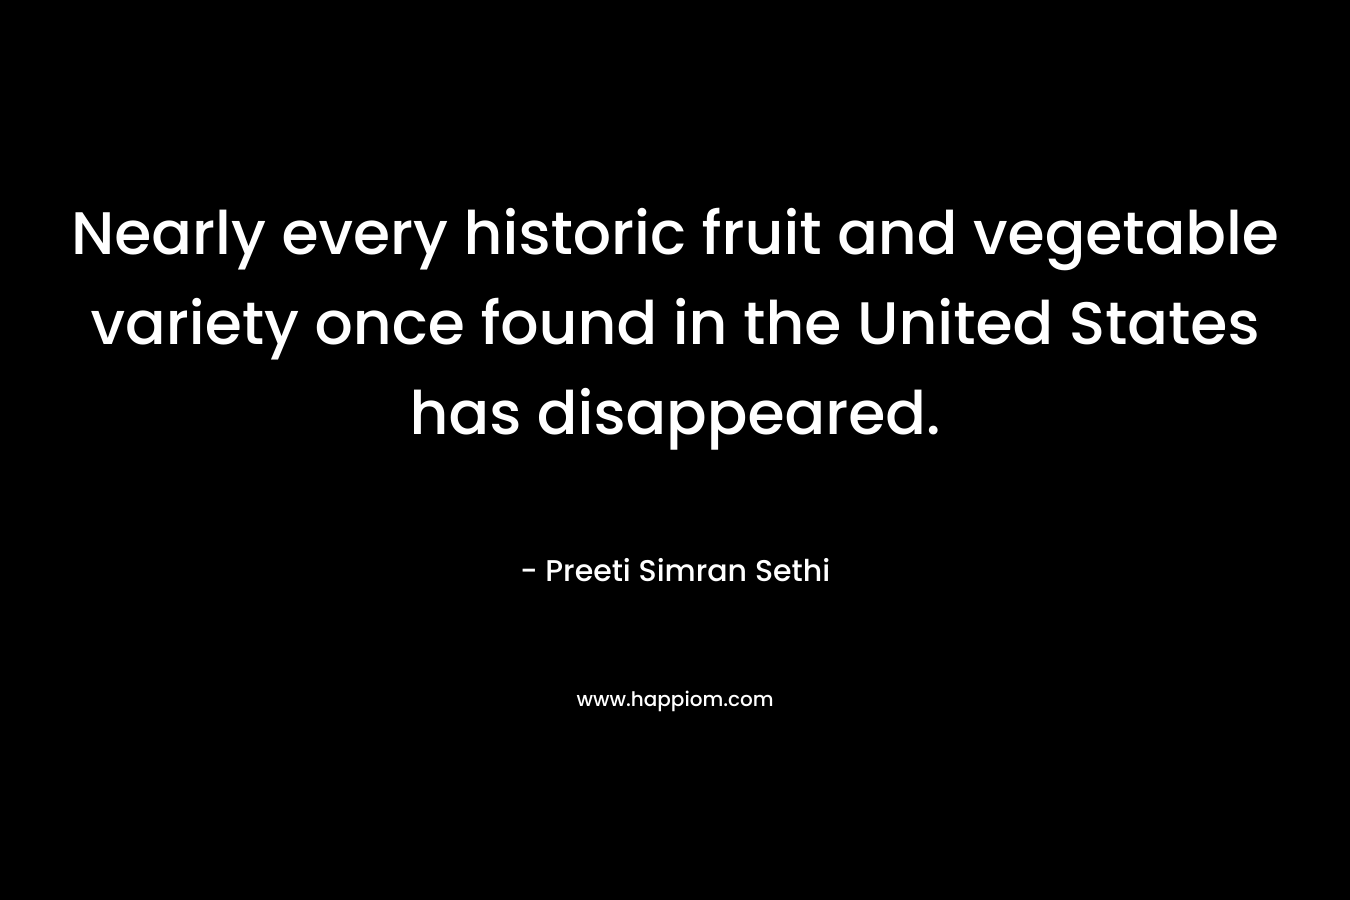 Nearly every historic fruit and vegetable variety once found in the United States has disappeared.